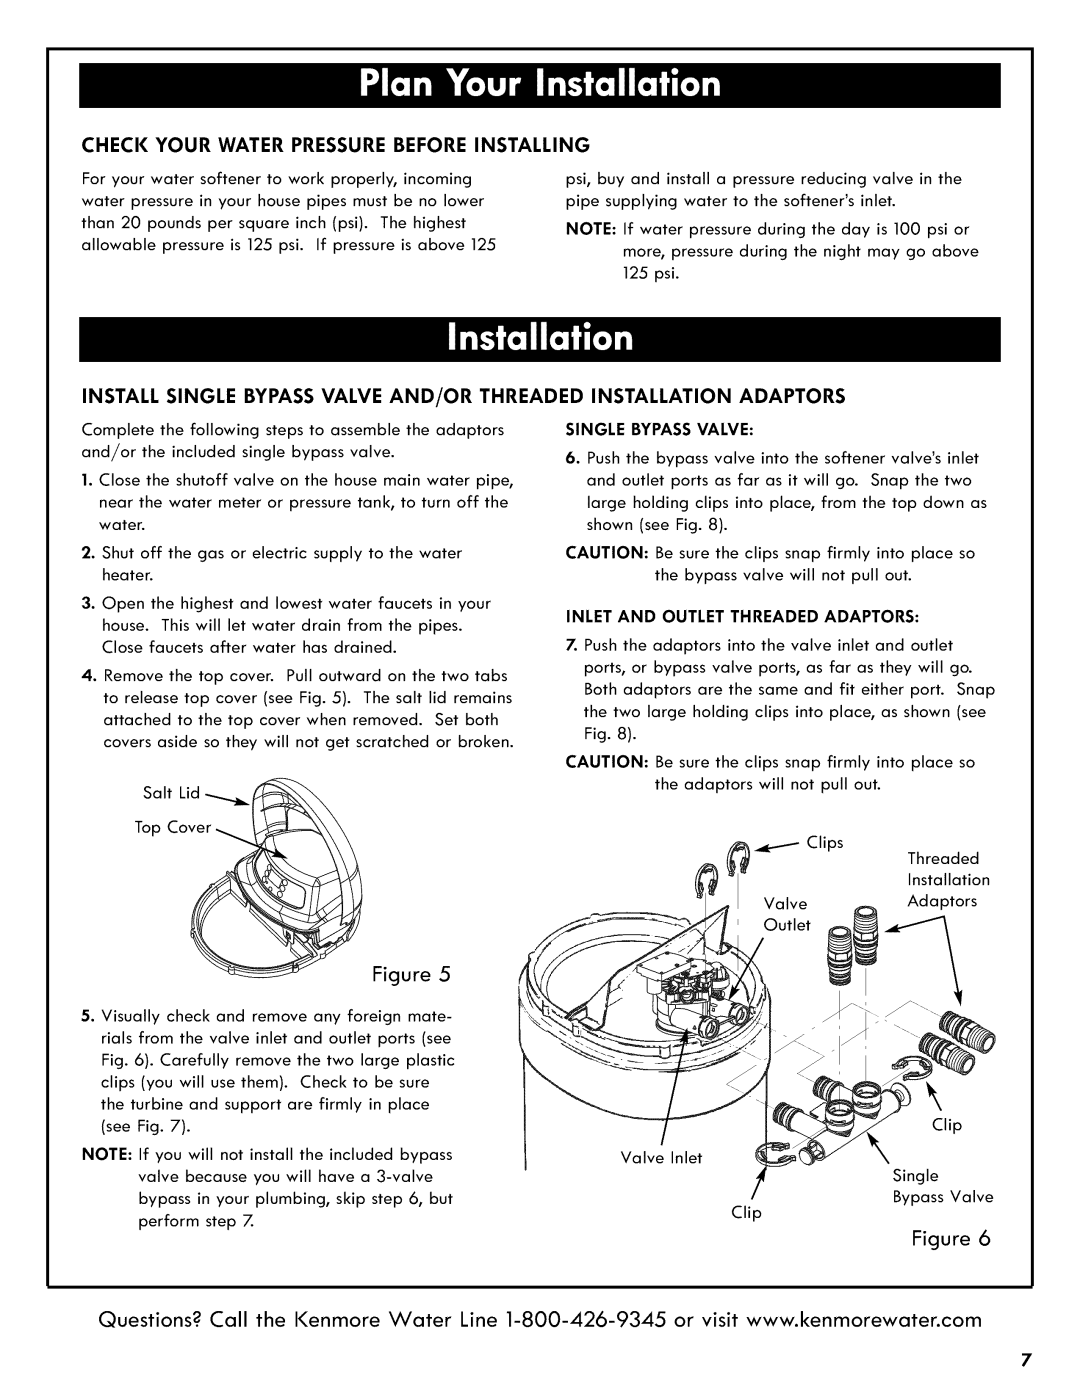 Kenmore 625.3835 Check Your Water Pressure Before Installing, Single Bypass Valve, Inlet And Outlet Threaded Adaptors 